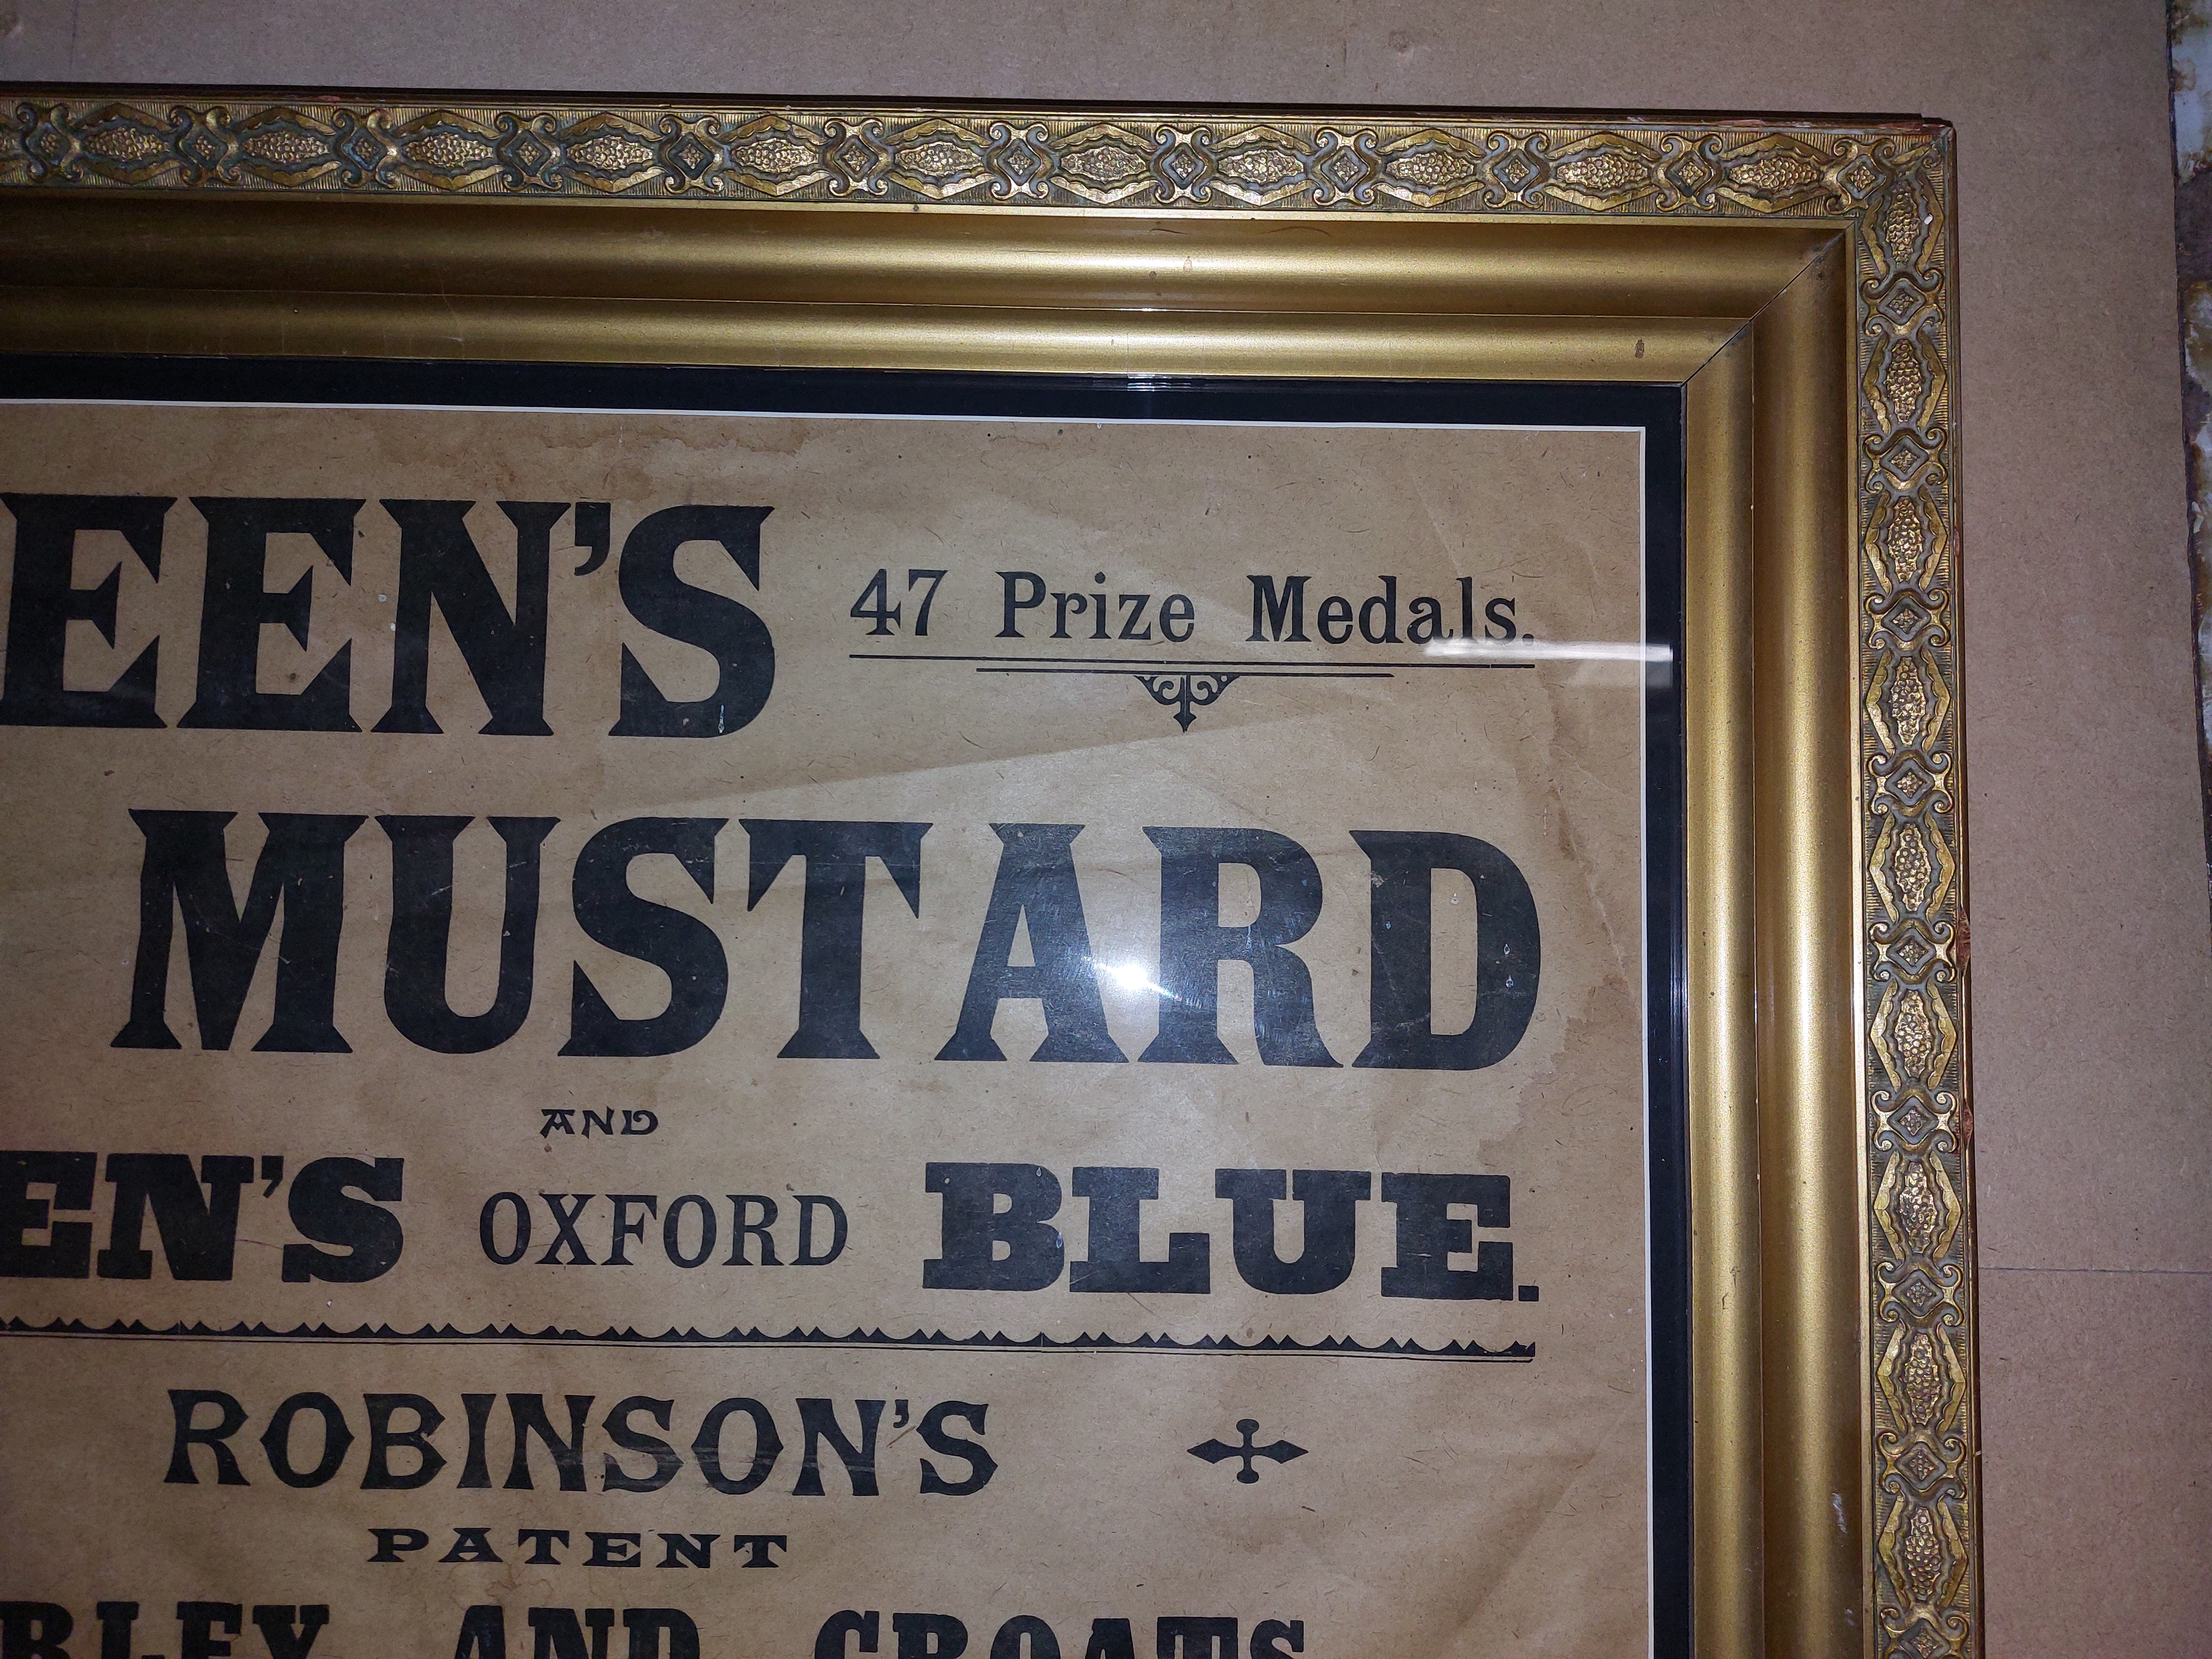 Keens Mustard Oxford Blue Providers to Her Majesty the Queen and The Prince of Wales framed - Image 3 of 5